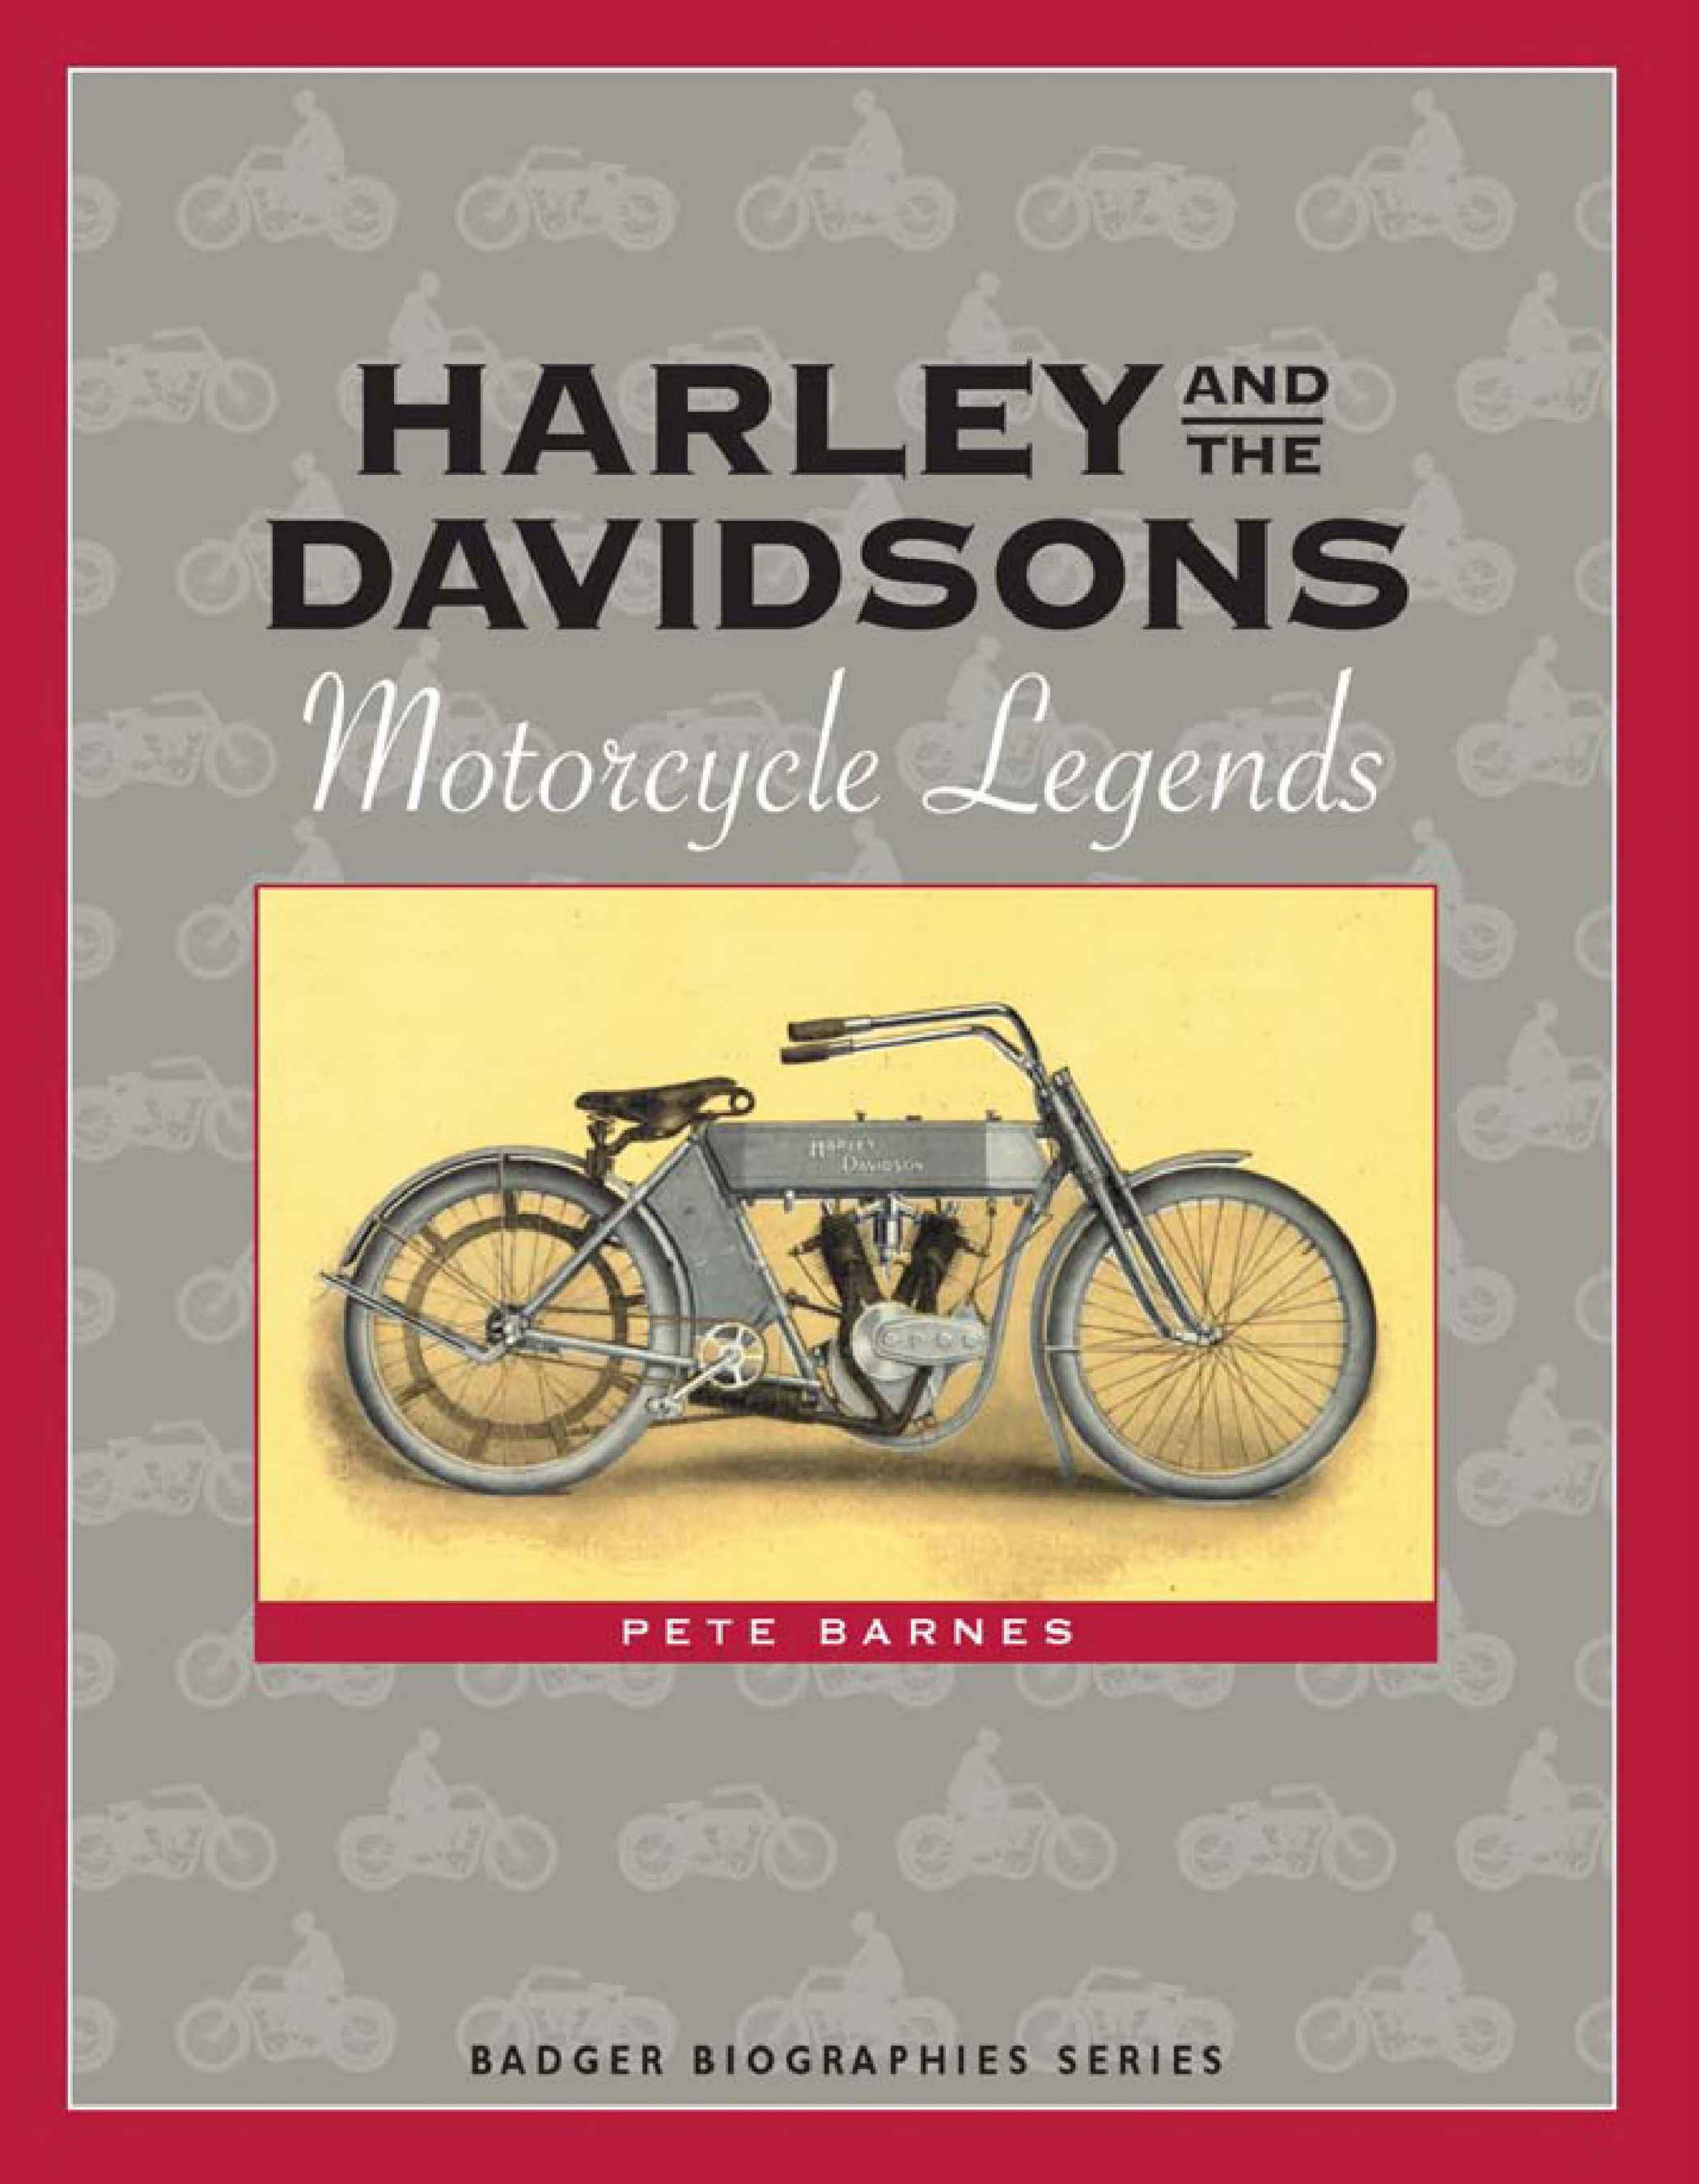 Harley and the Davidson